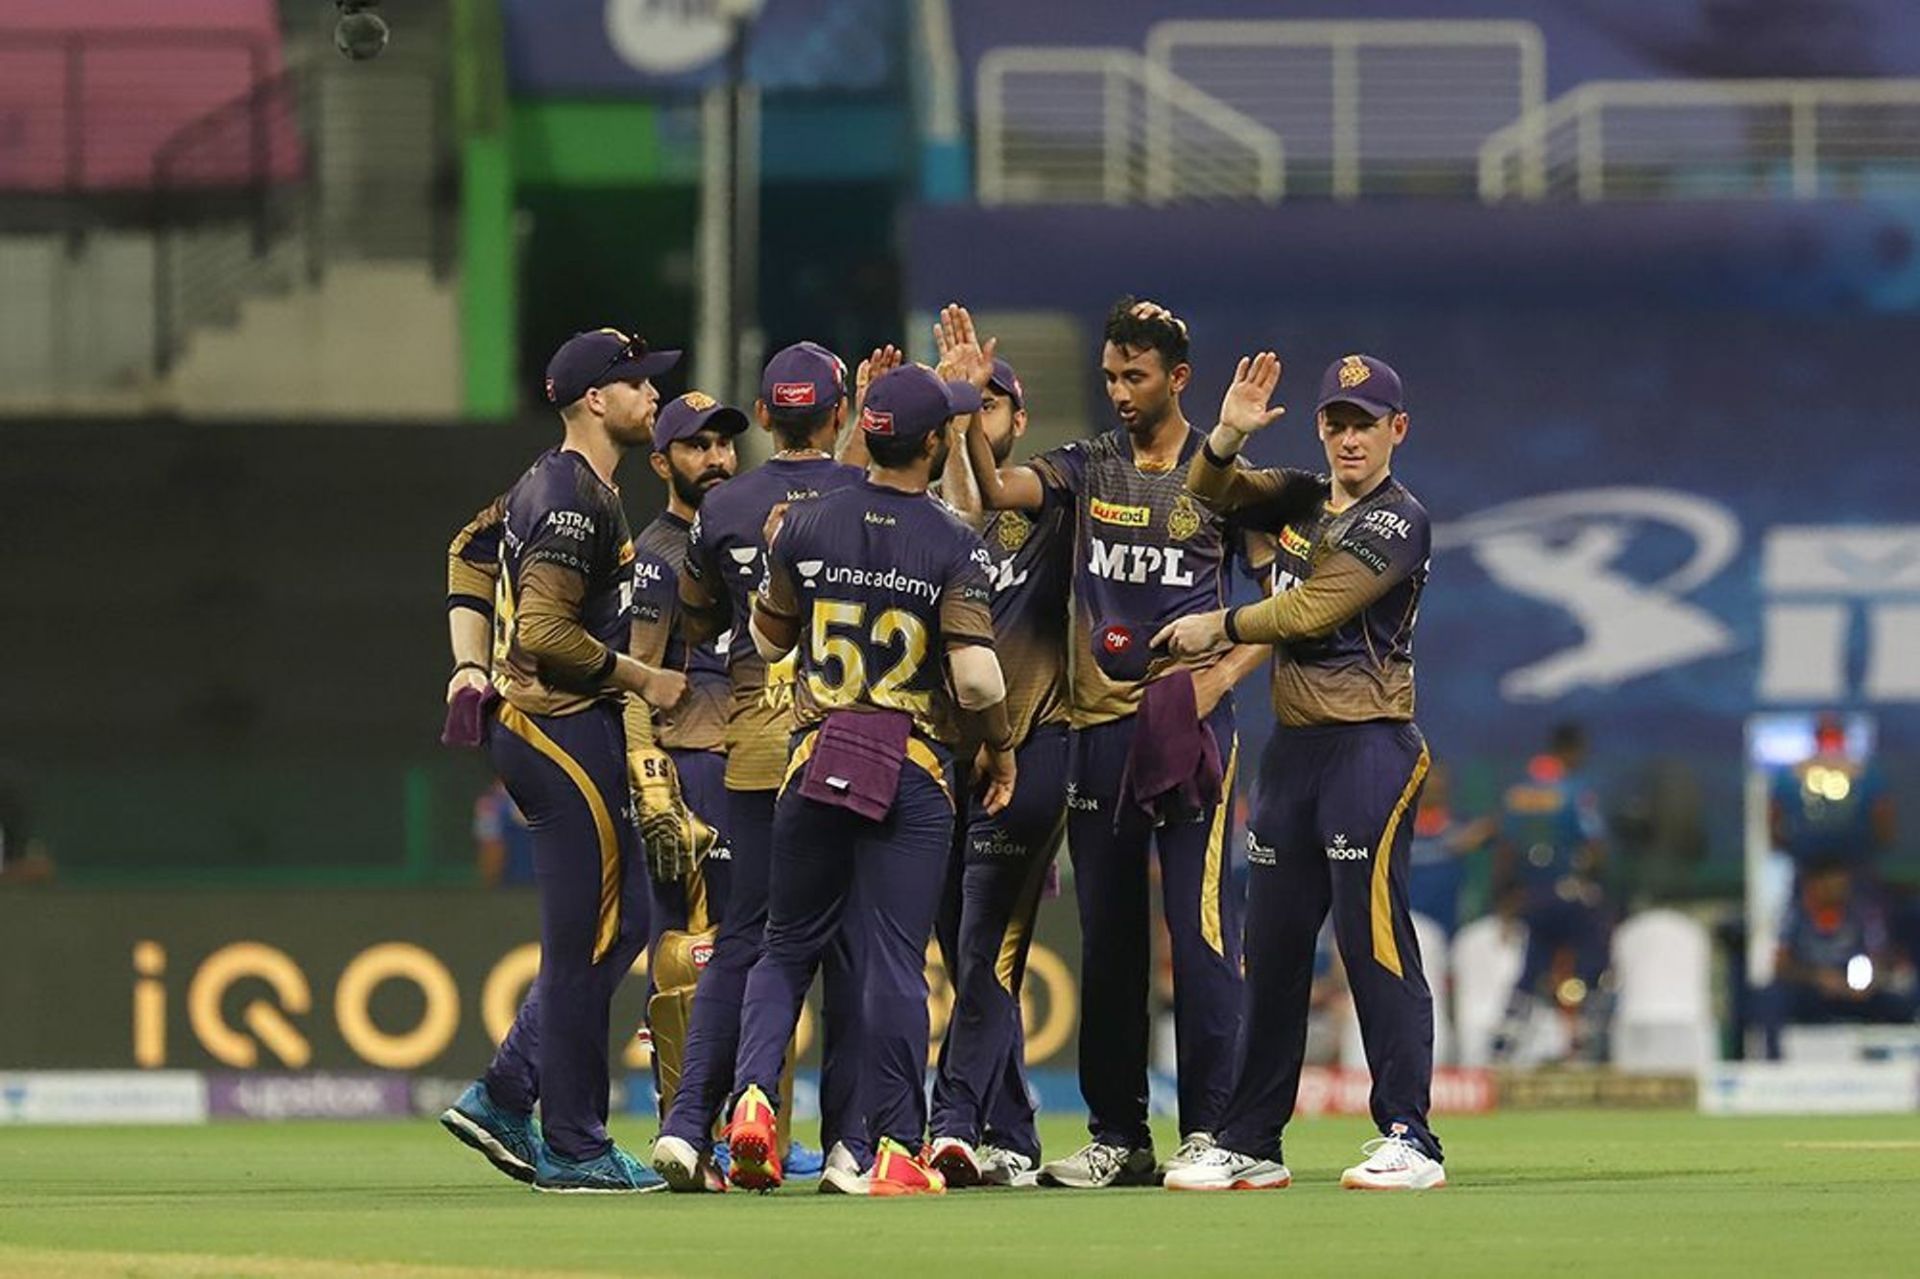 Kolkata Knight Riders (KKR) sparked a remarkable turnaround to finish runners-up in IPL 2021 (Picture Credits: Faheem Hussain/Sportzpics/IPL)